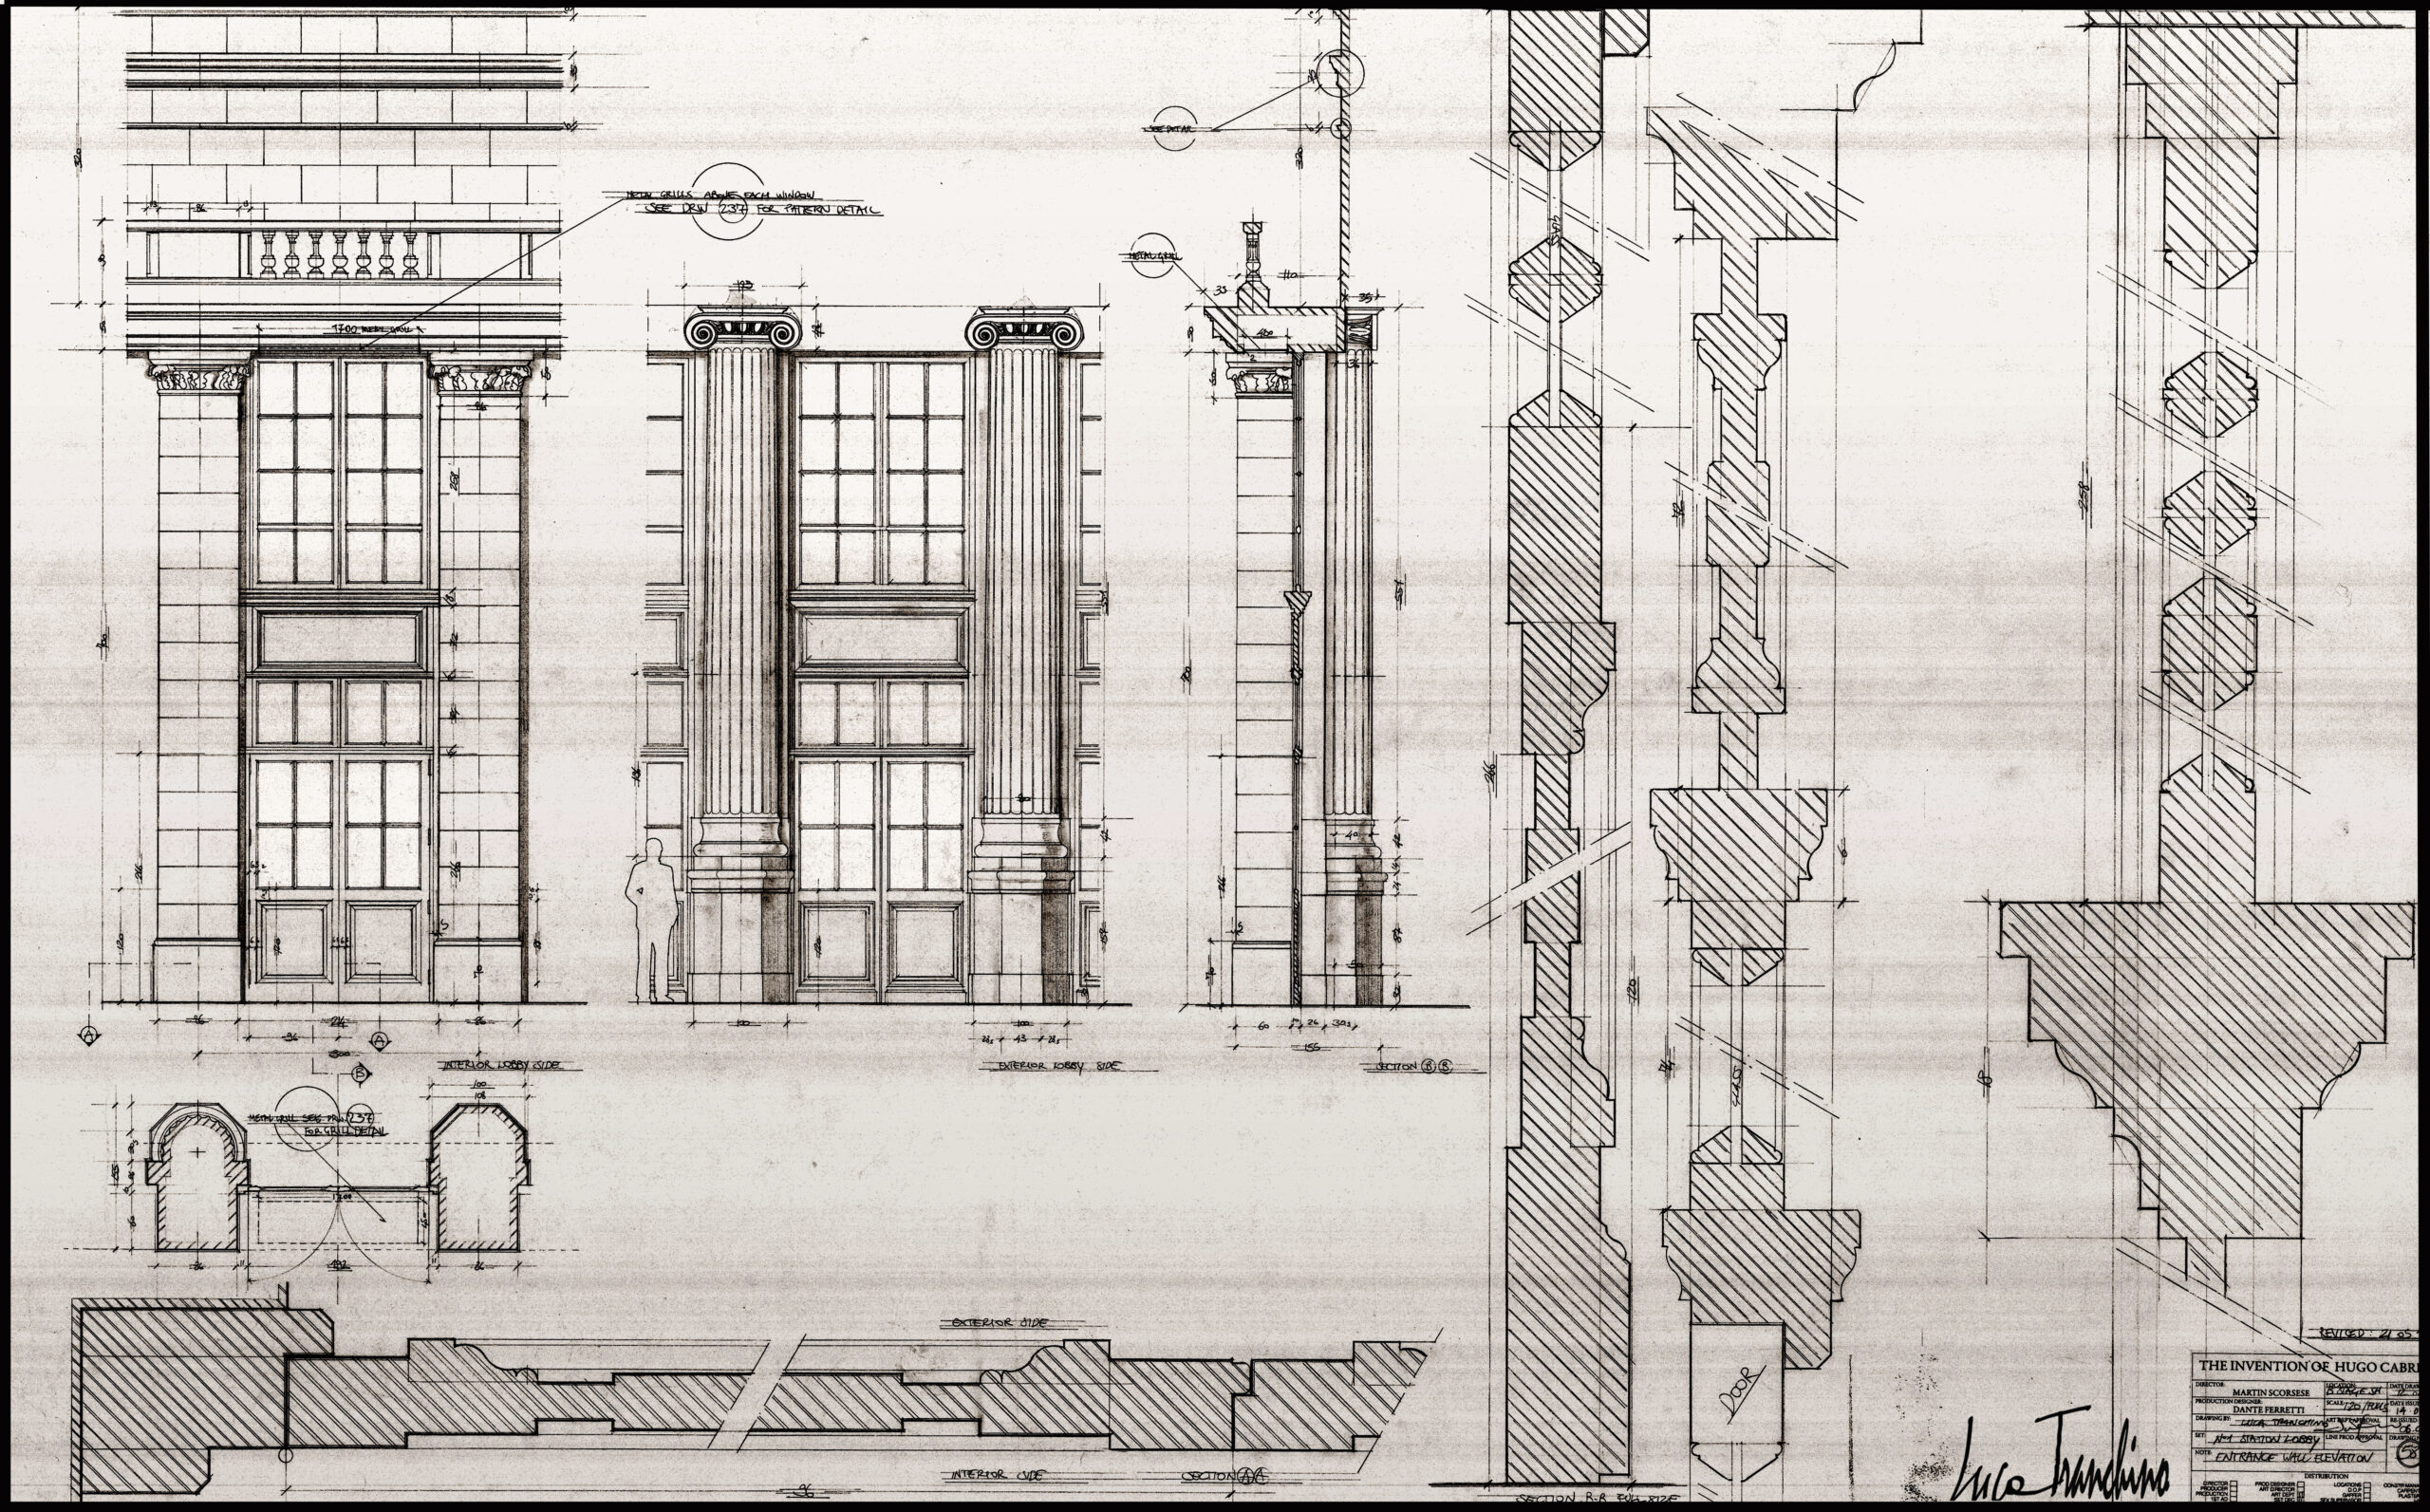 HUGO - Directed by Martin Scorsese - Int. Montparnasse Station, Technical Drawing Details by Luca Tranchino - ©2011 - Sony Pictures